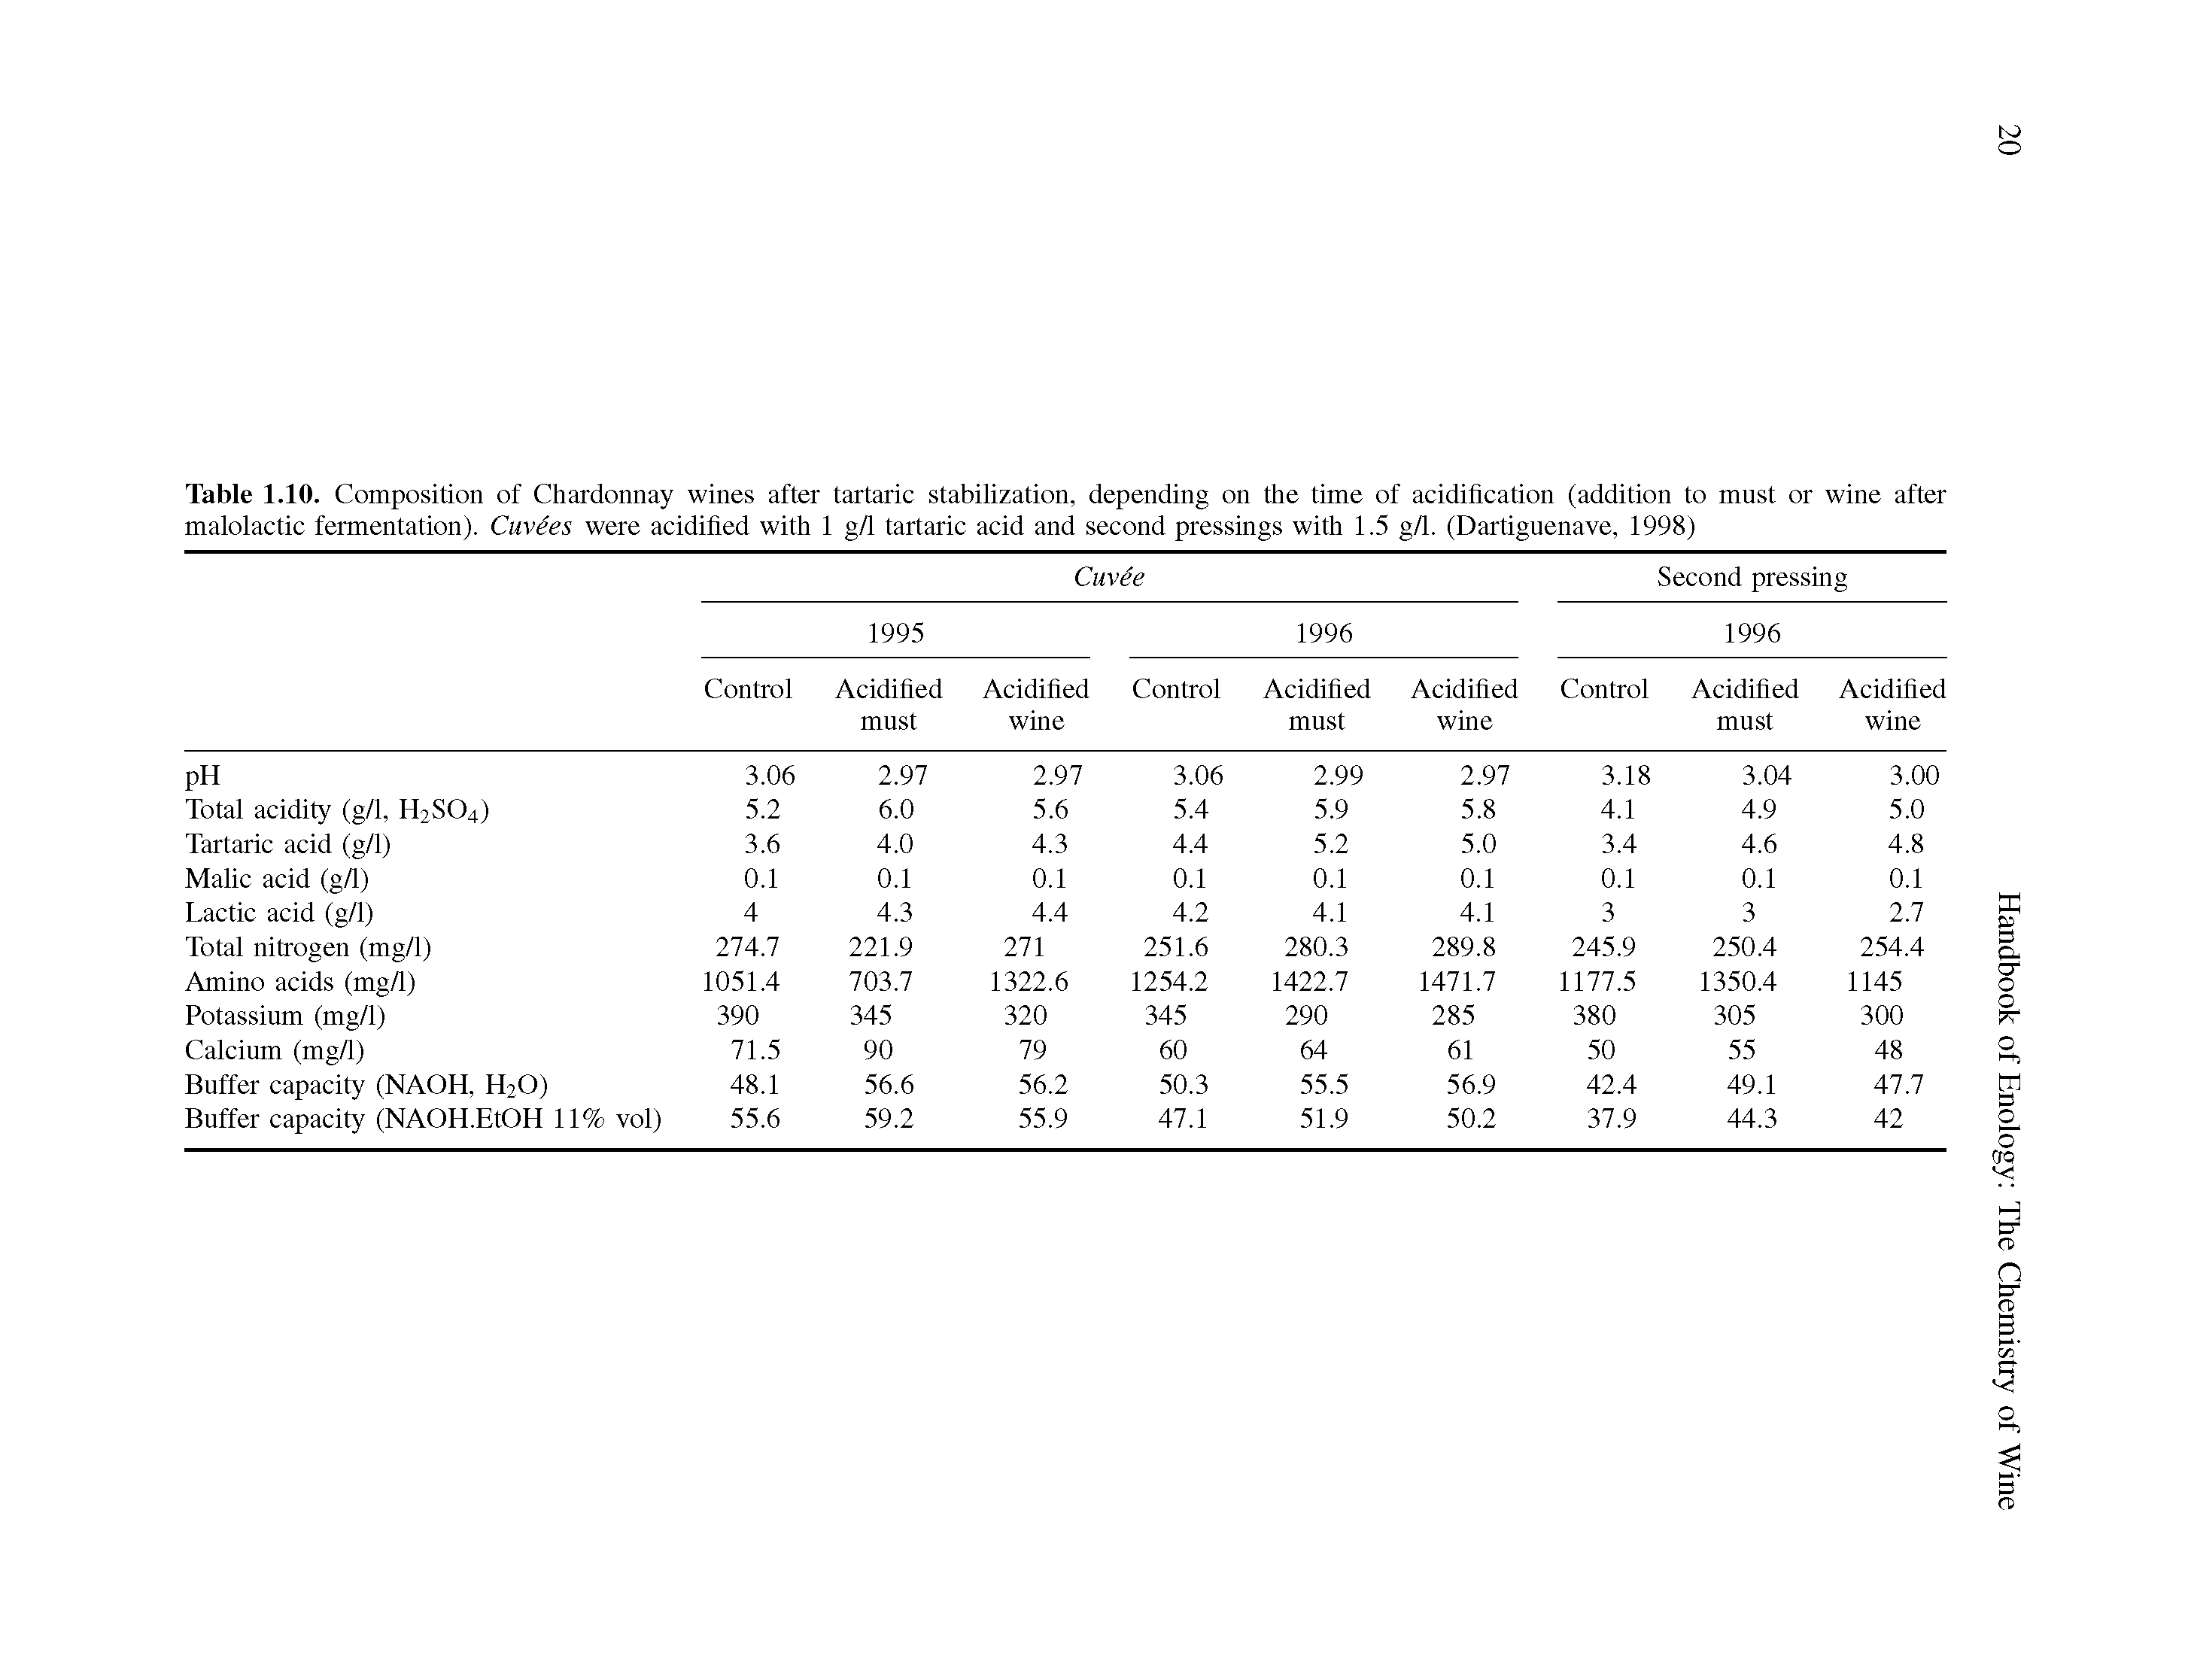 Table 1.10. Composition of Chardonnay wines after tartaric stabilization, depending on the time of acidification (addition to must or wine after malolactic fermentation). Cuvees were acidified with 1 g/1 tartaric acid and second pressings with 1.5 g/1. (Dartiguenave, 1998)...